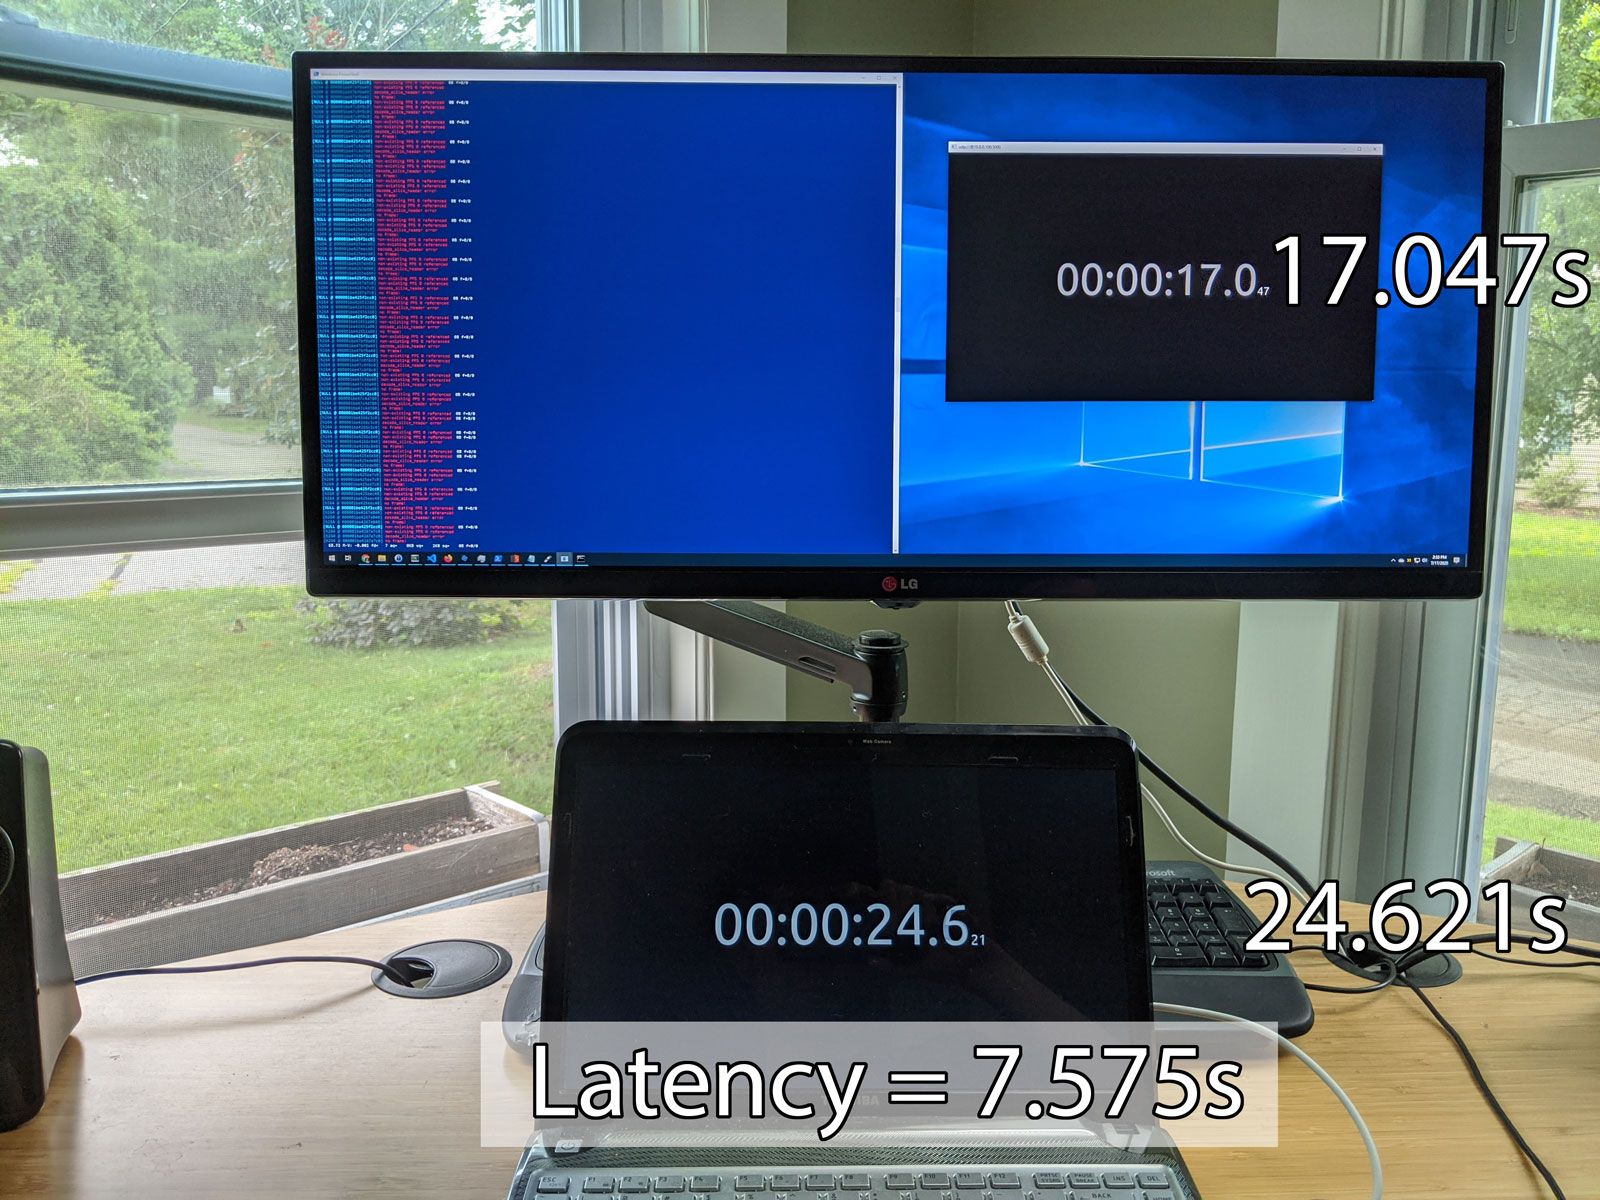 Comparison of Lenkeng LKV373A with HDMI dongle